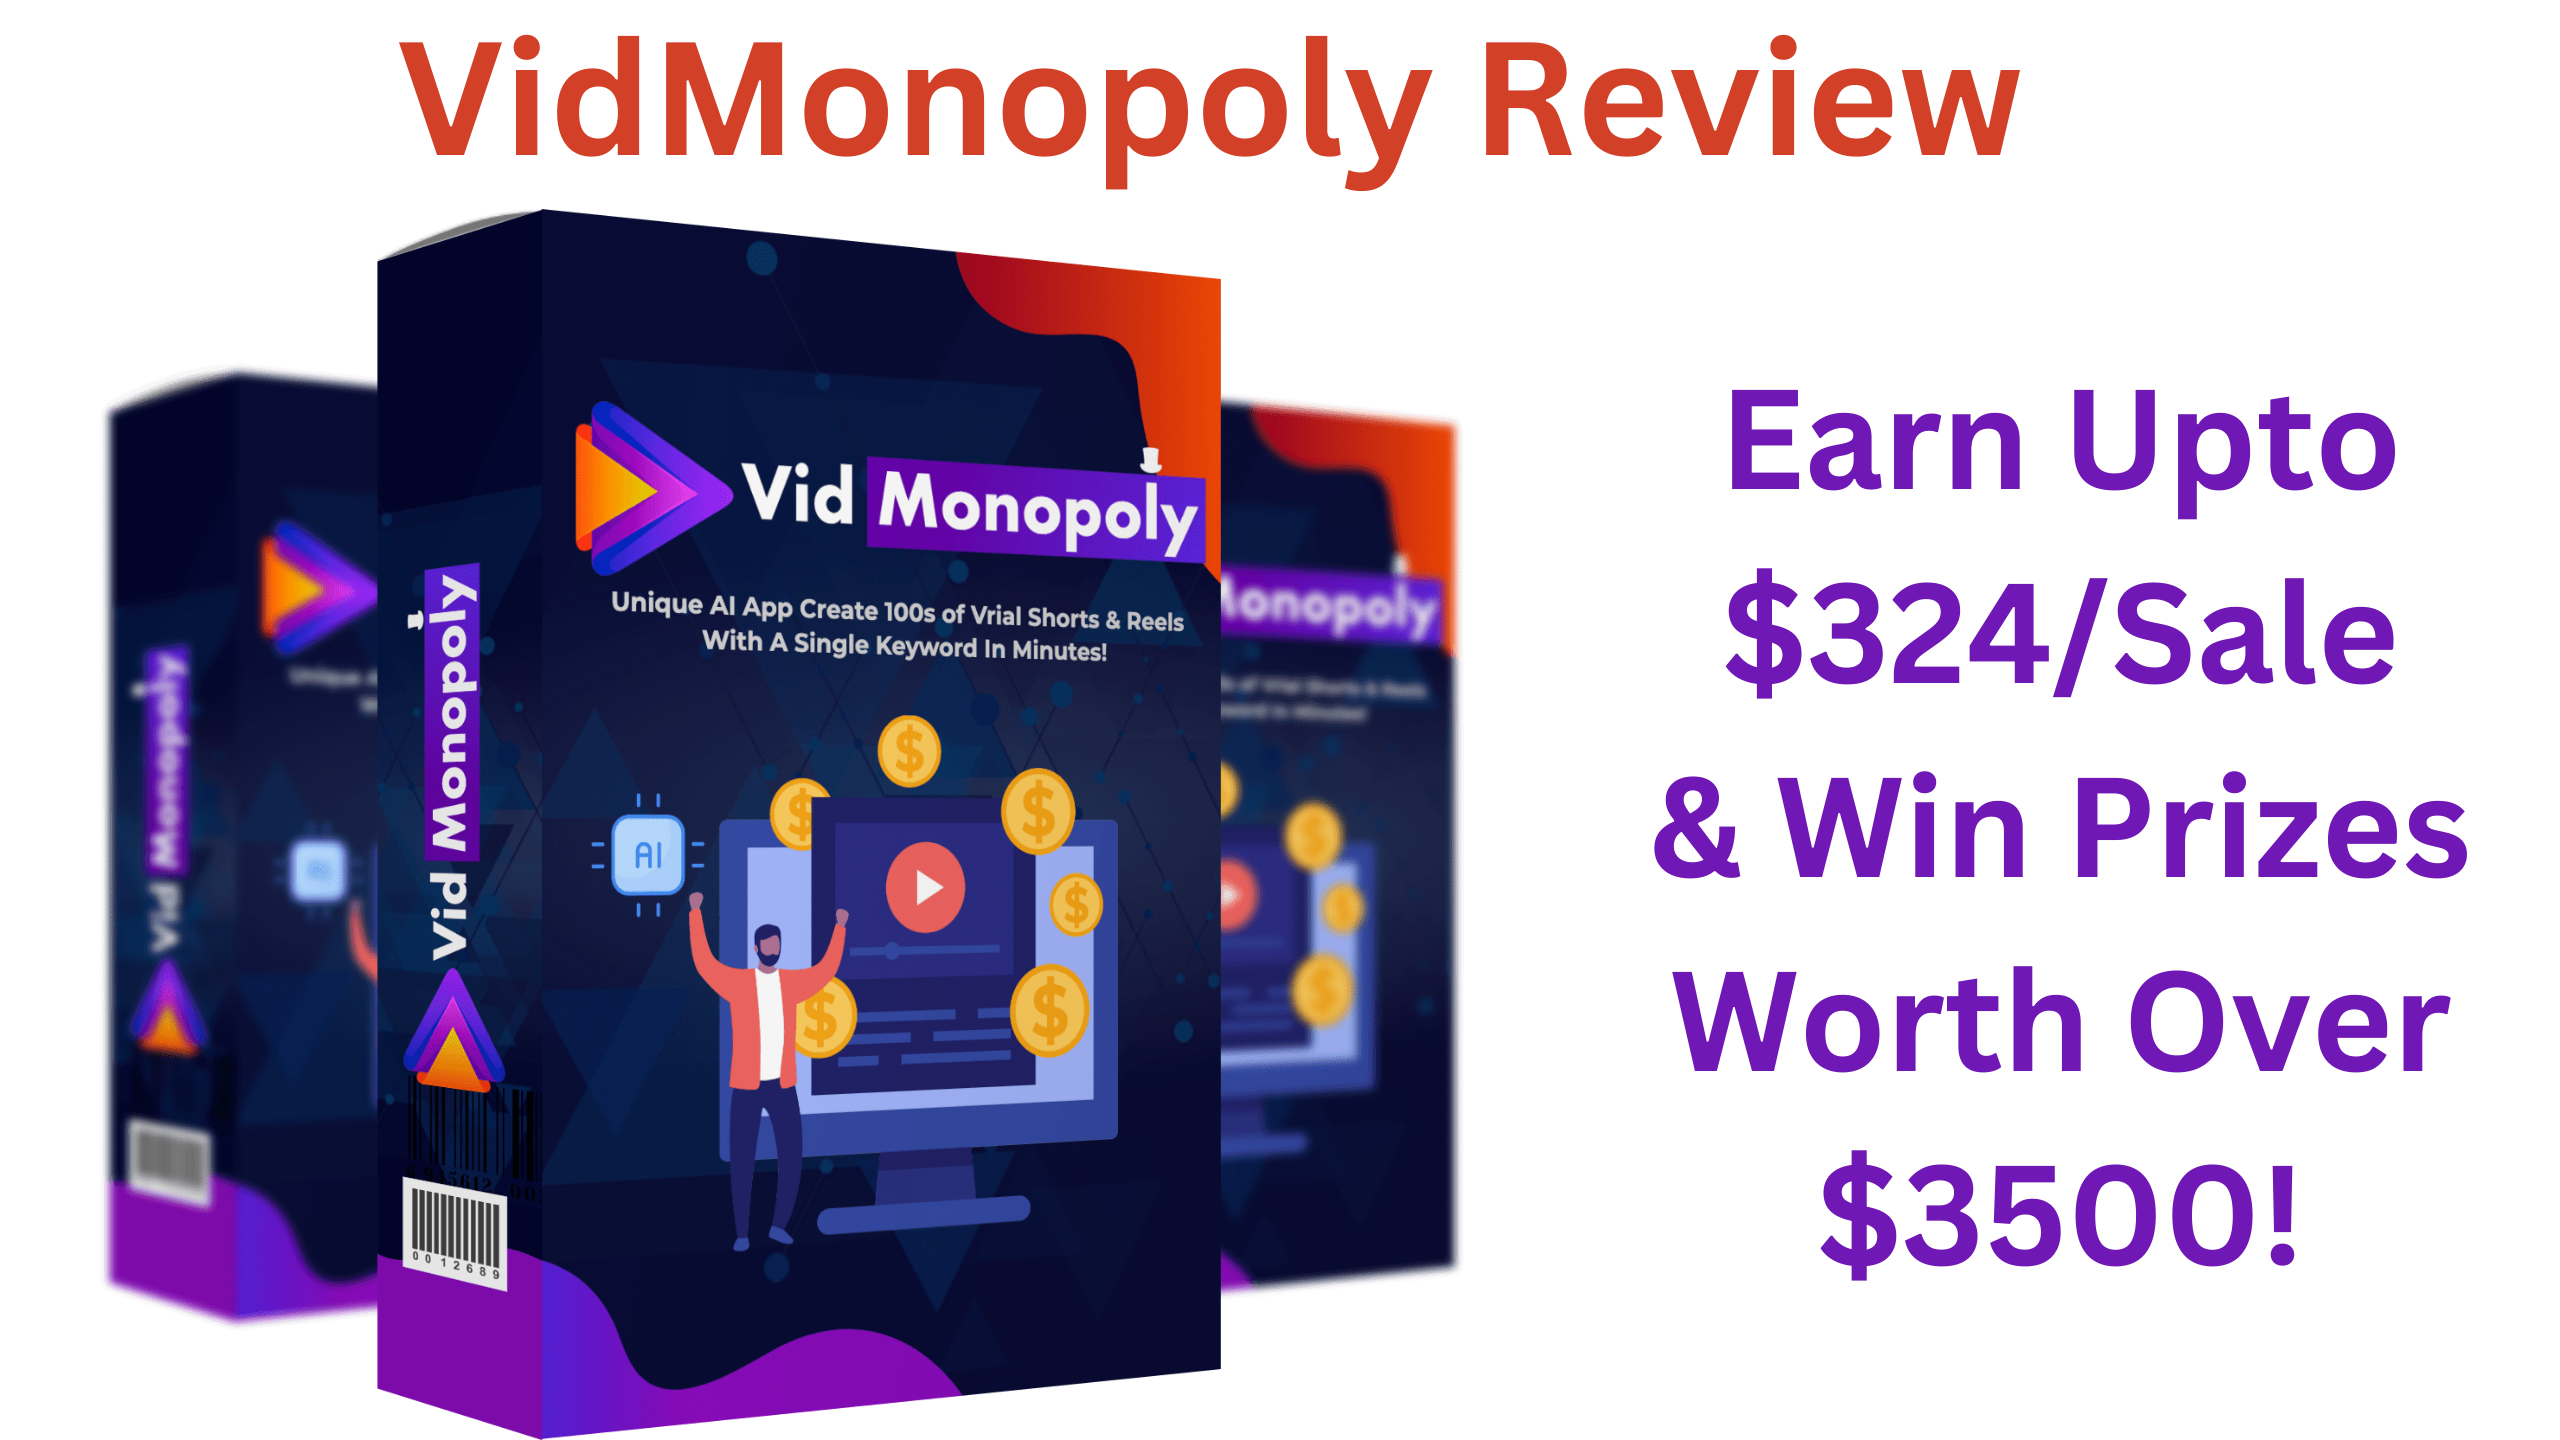 VidMonopoly Review - Earn Upto $324/Sale & Win Prizes Worth Over $3500!